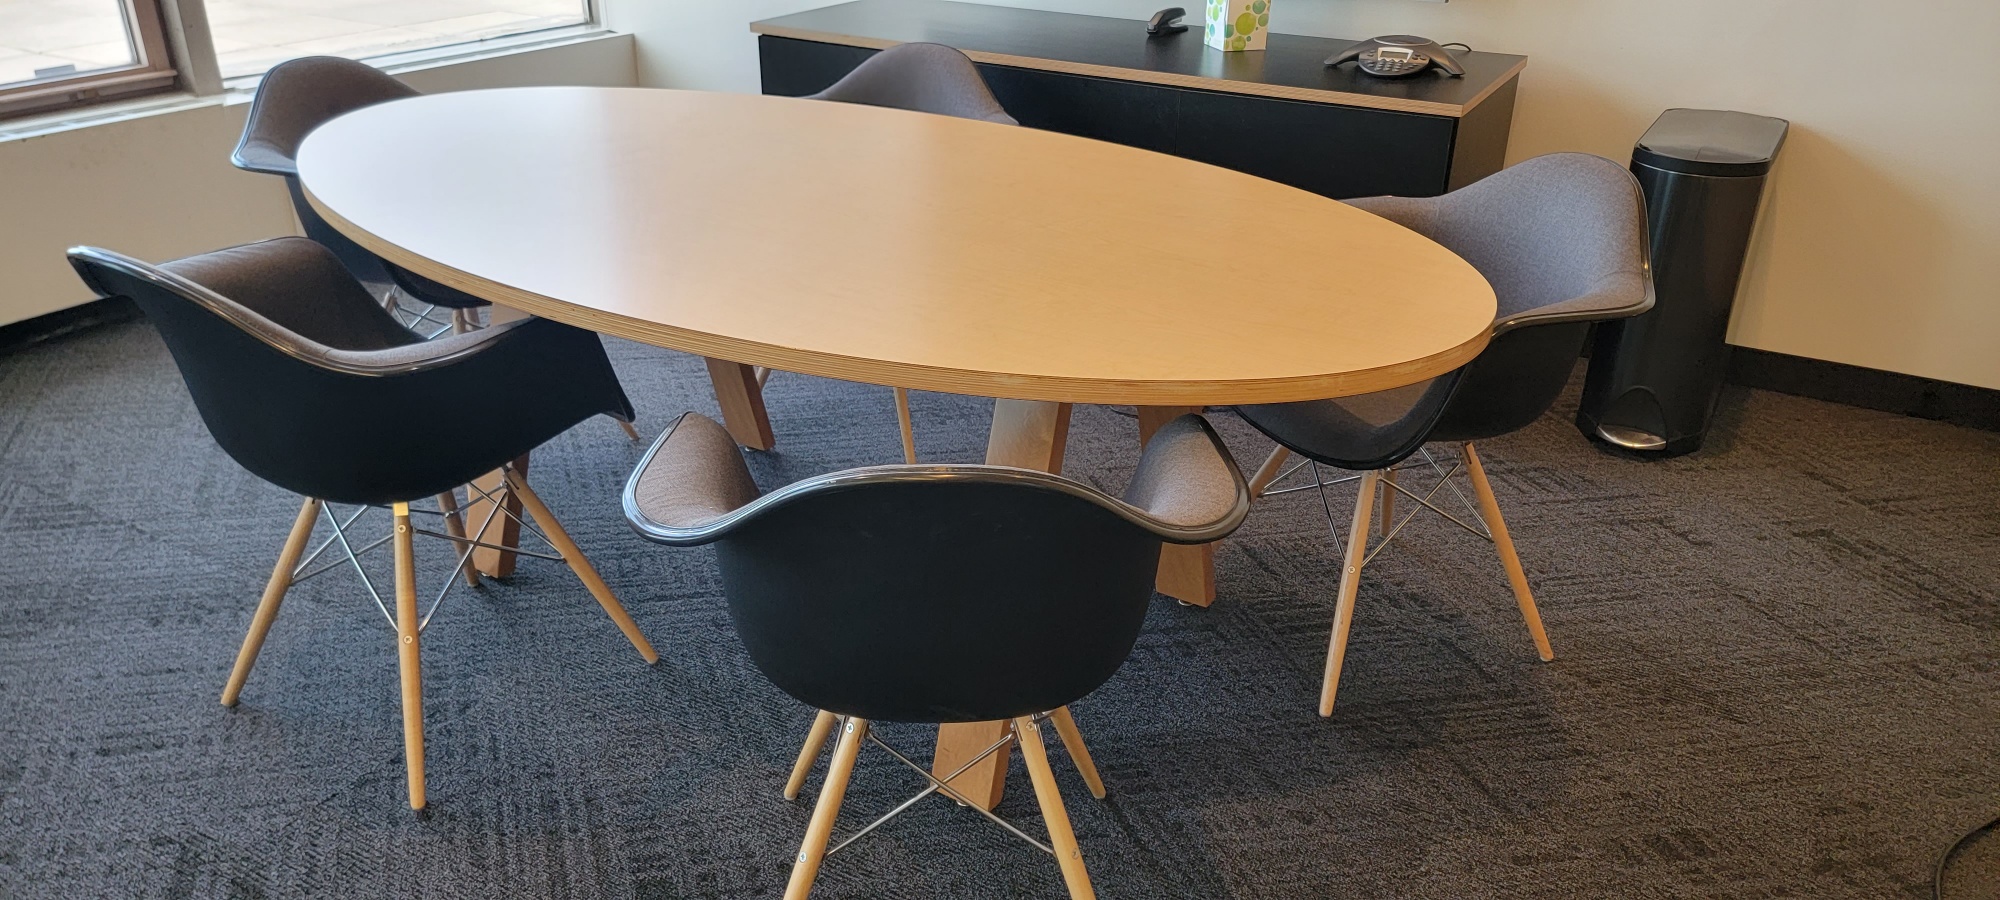 T12230 - 7' Meeting Table